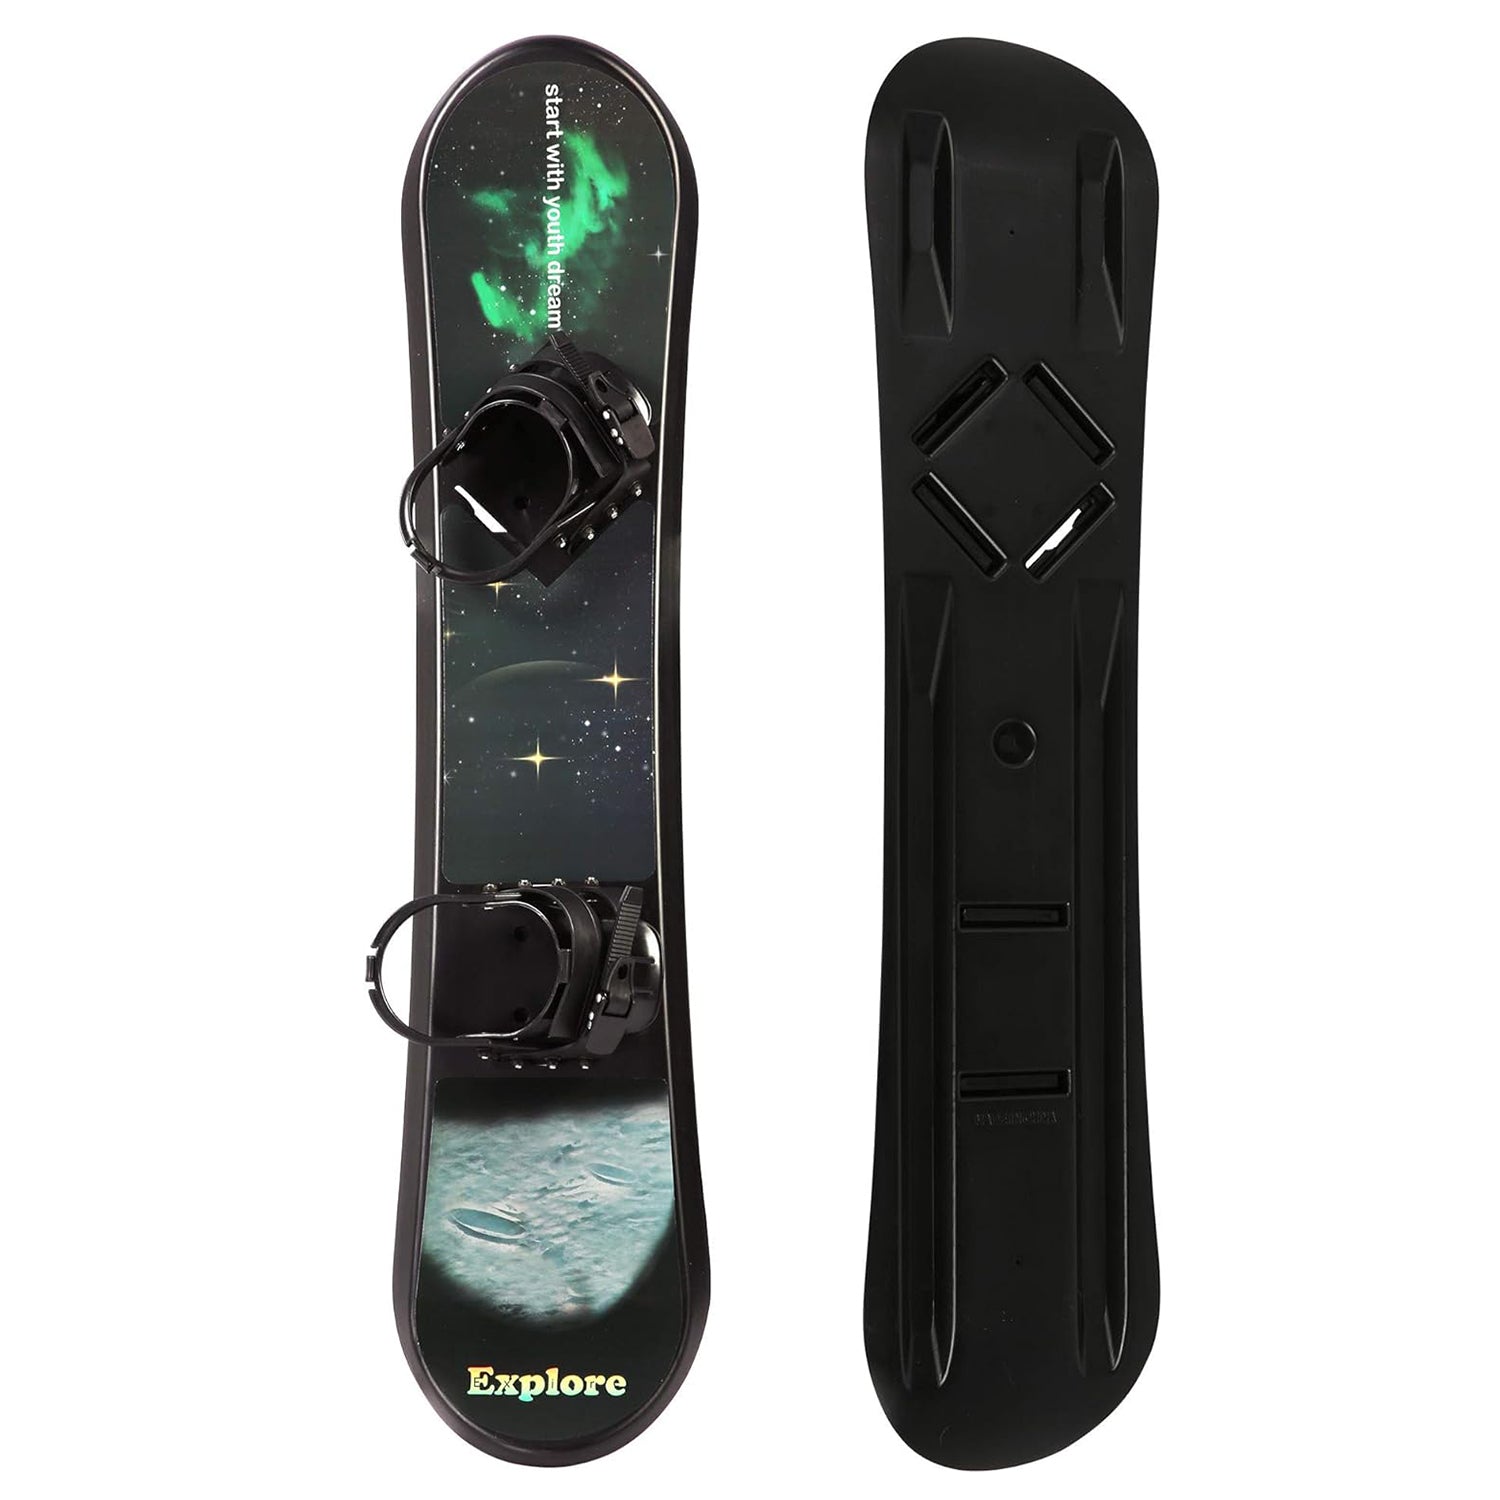 Snowboard for Kids Beginners - Adjustable Step-in Bindings Winter Sport Ski Snow Board - 44 inches Length + Ages 5 to 18 + Weight Limit 120 lbs